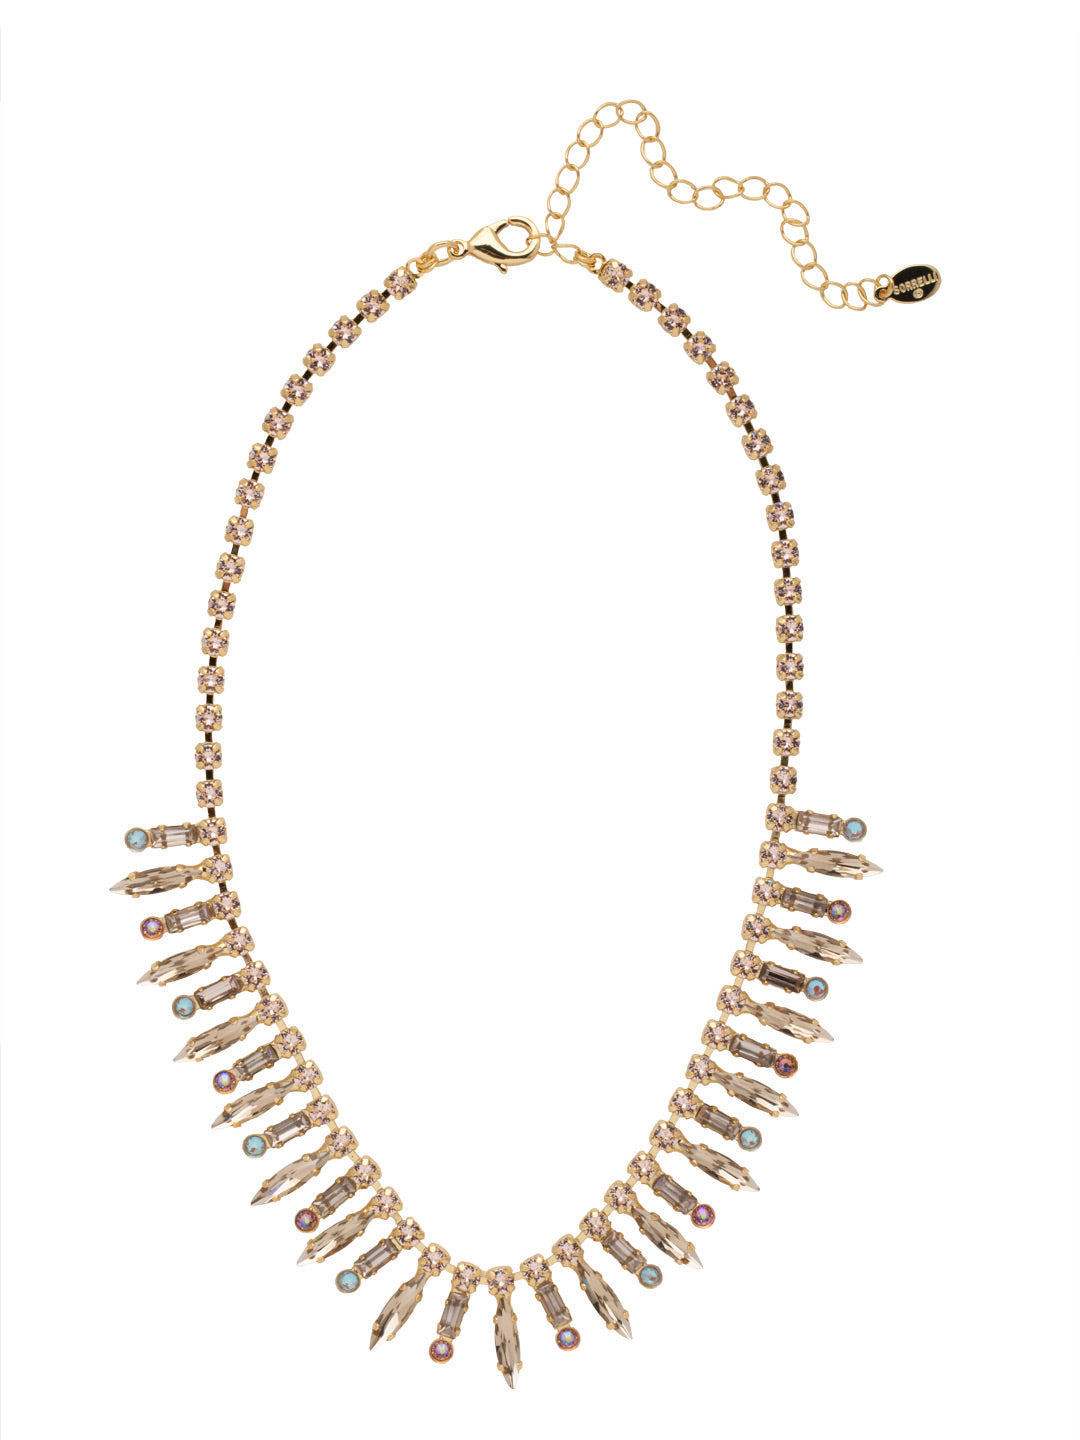 Emory Statement Necklace - NFC20BGRSU - <p>The Emory Statement Necklace features hanging baguette, round, and emerald cut crystals on an adjustable crystal embellished chain, secured with a lobster claw clasp. From Sorrelli's Raw Sugar collection in our Bright Gold-tone finish.</p>